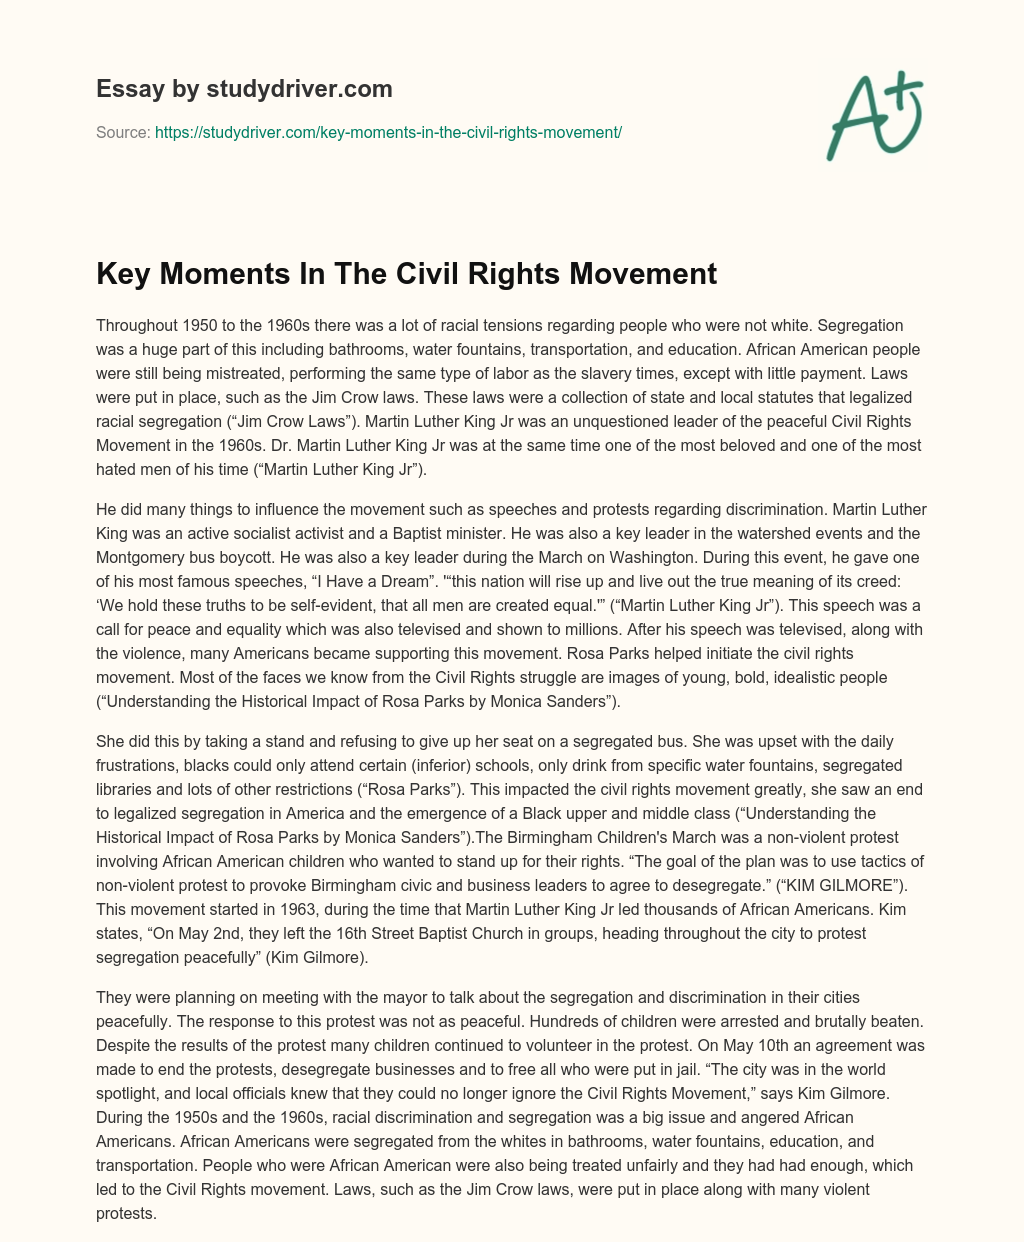 Key Moments in the Civil Rights Movement essay